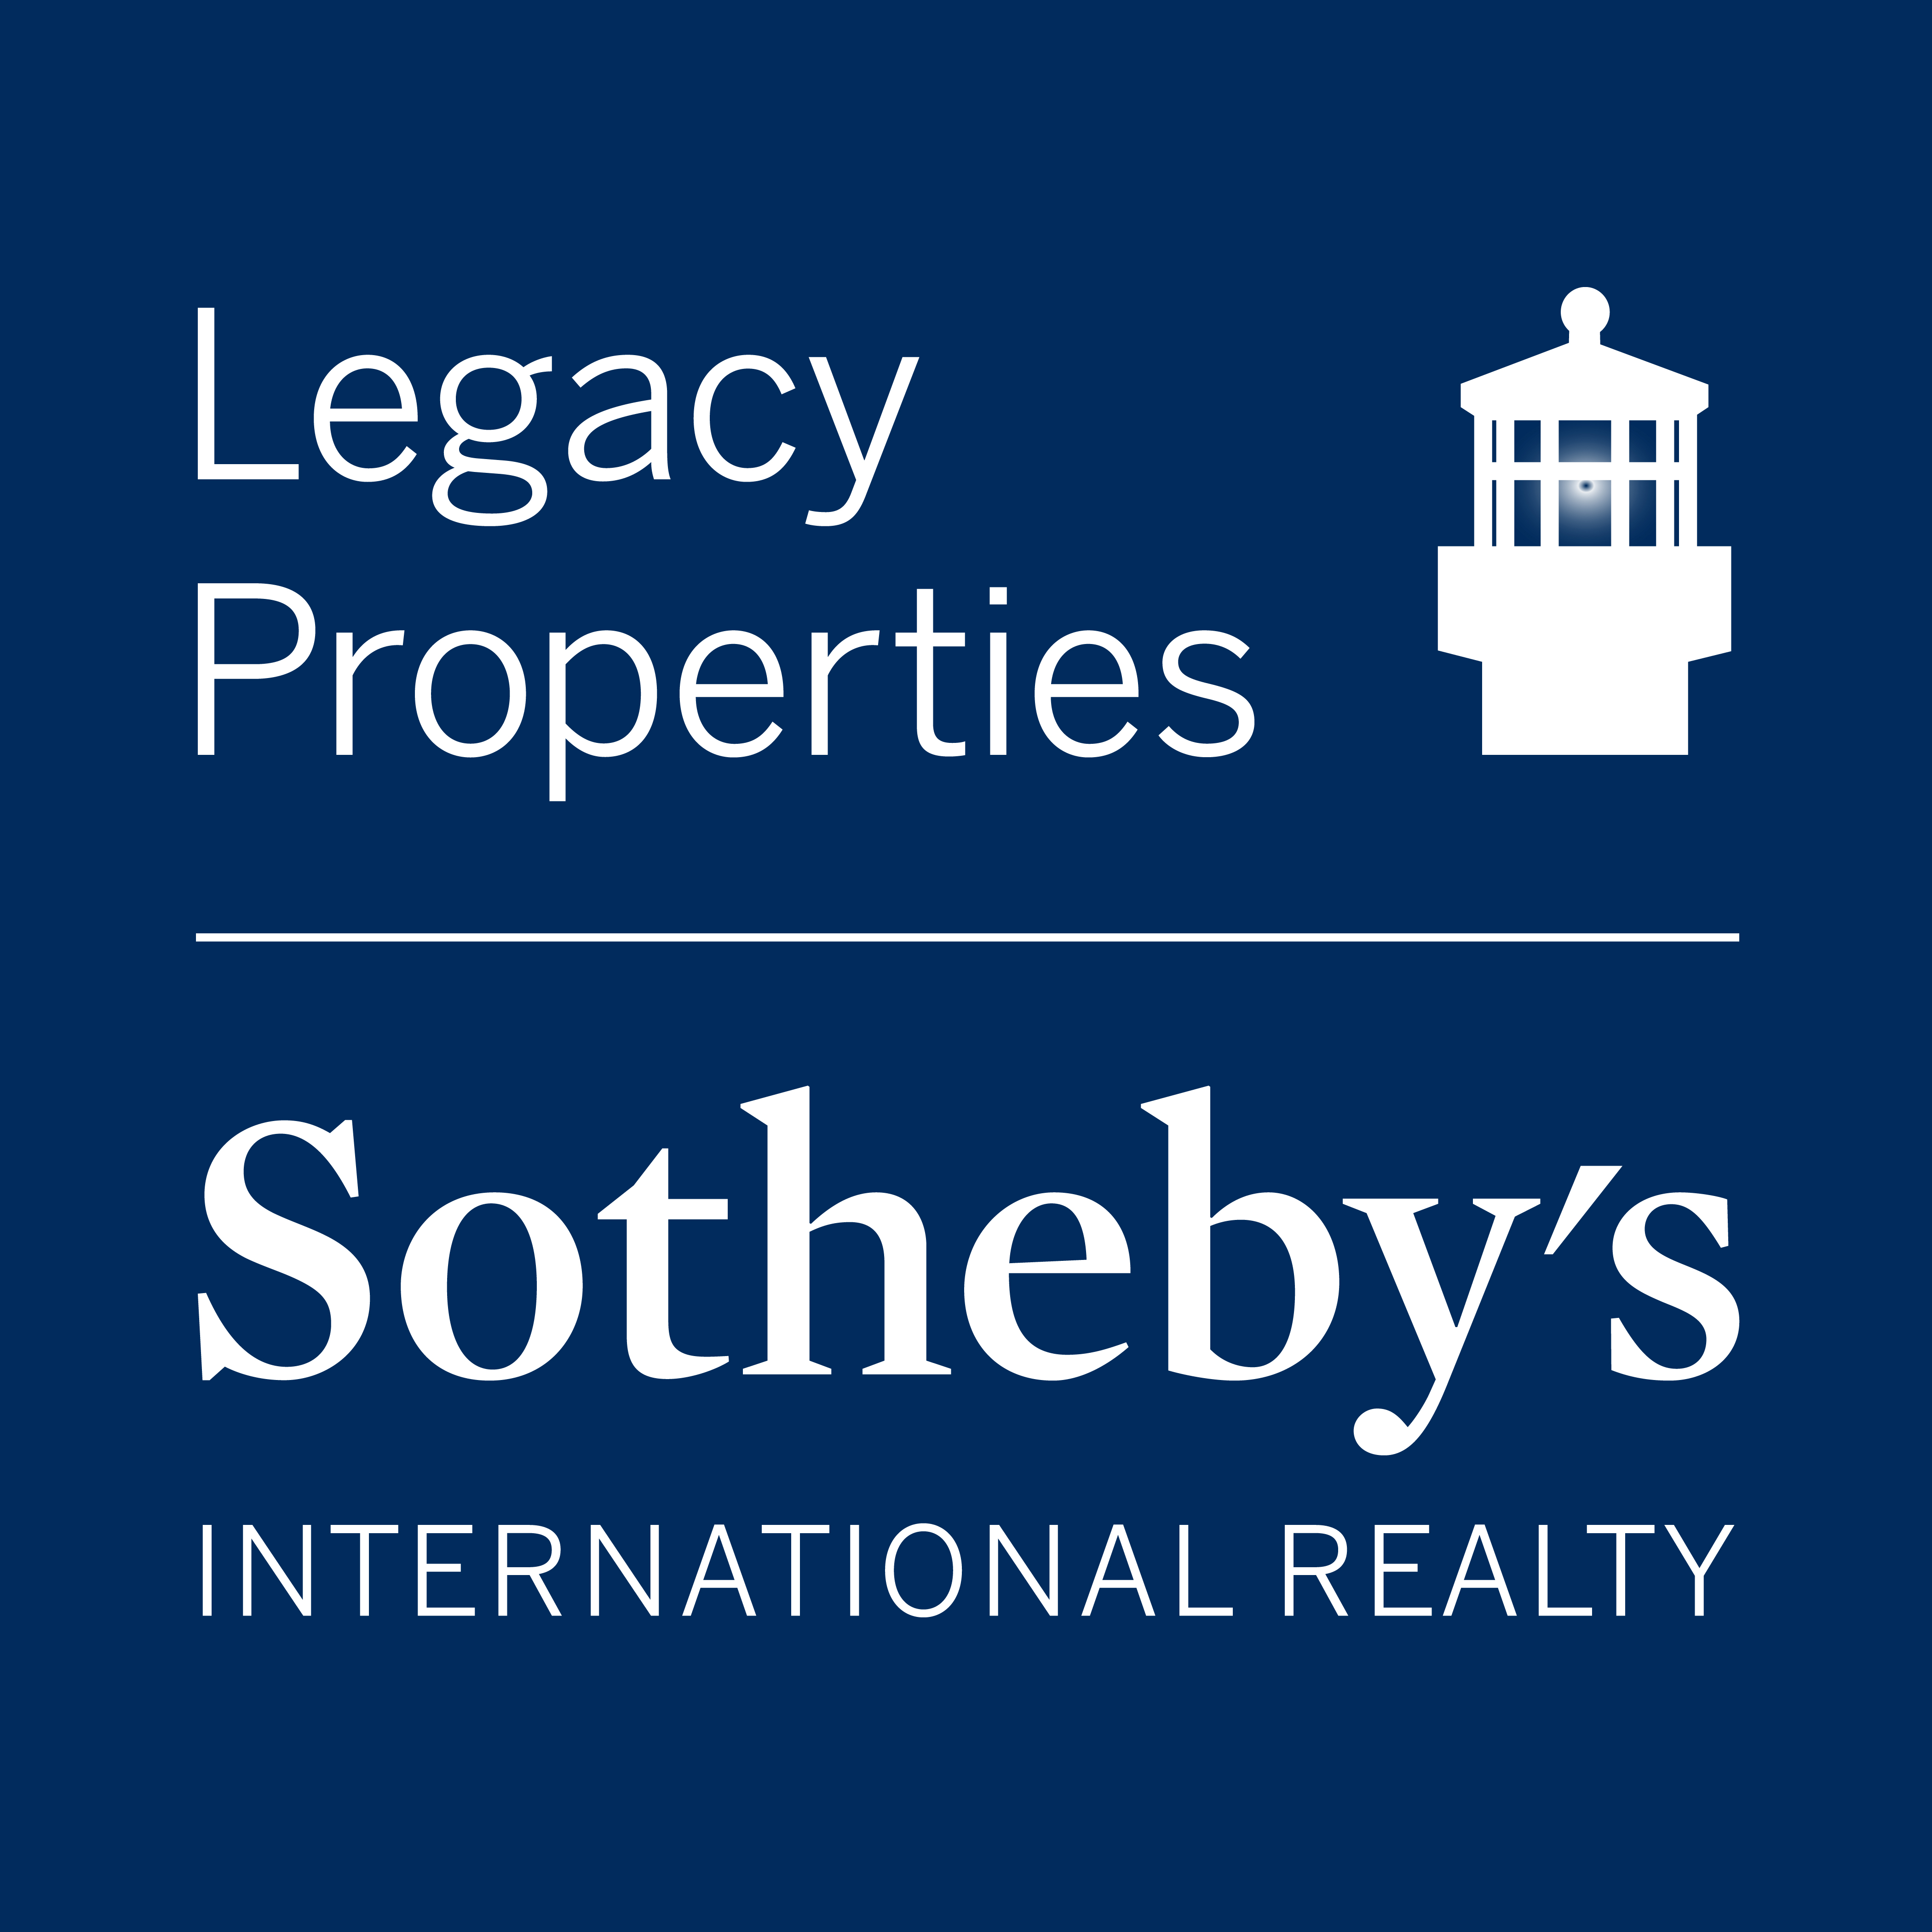 Legacy Properties Sotheby’s International Realty